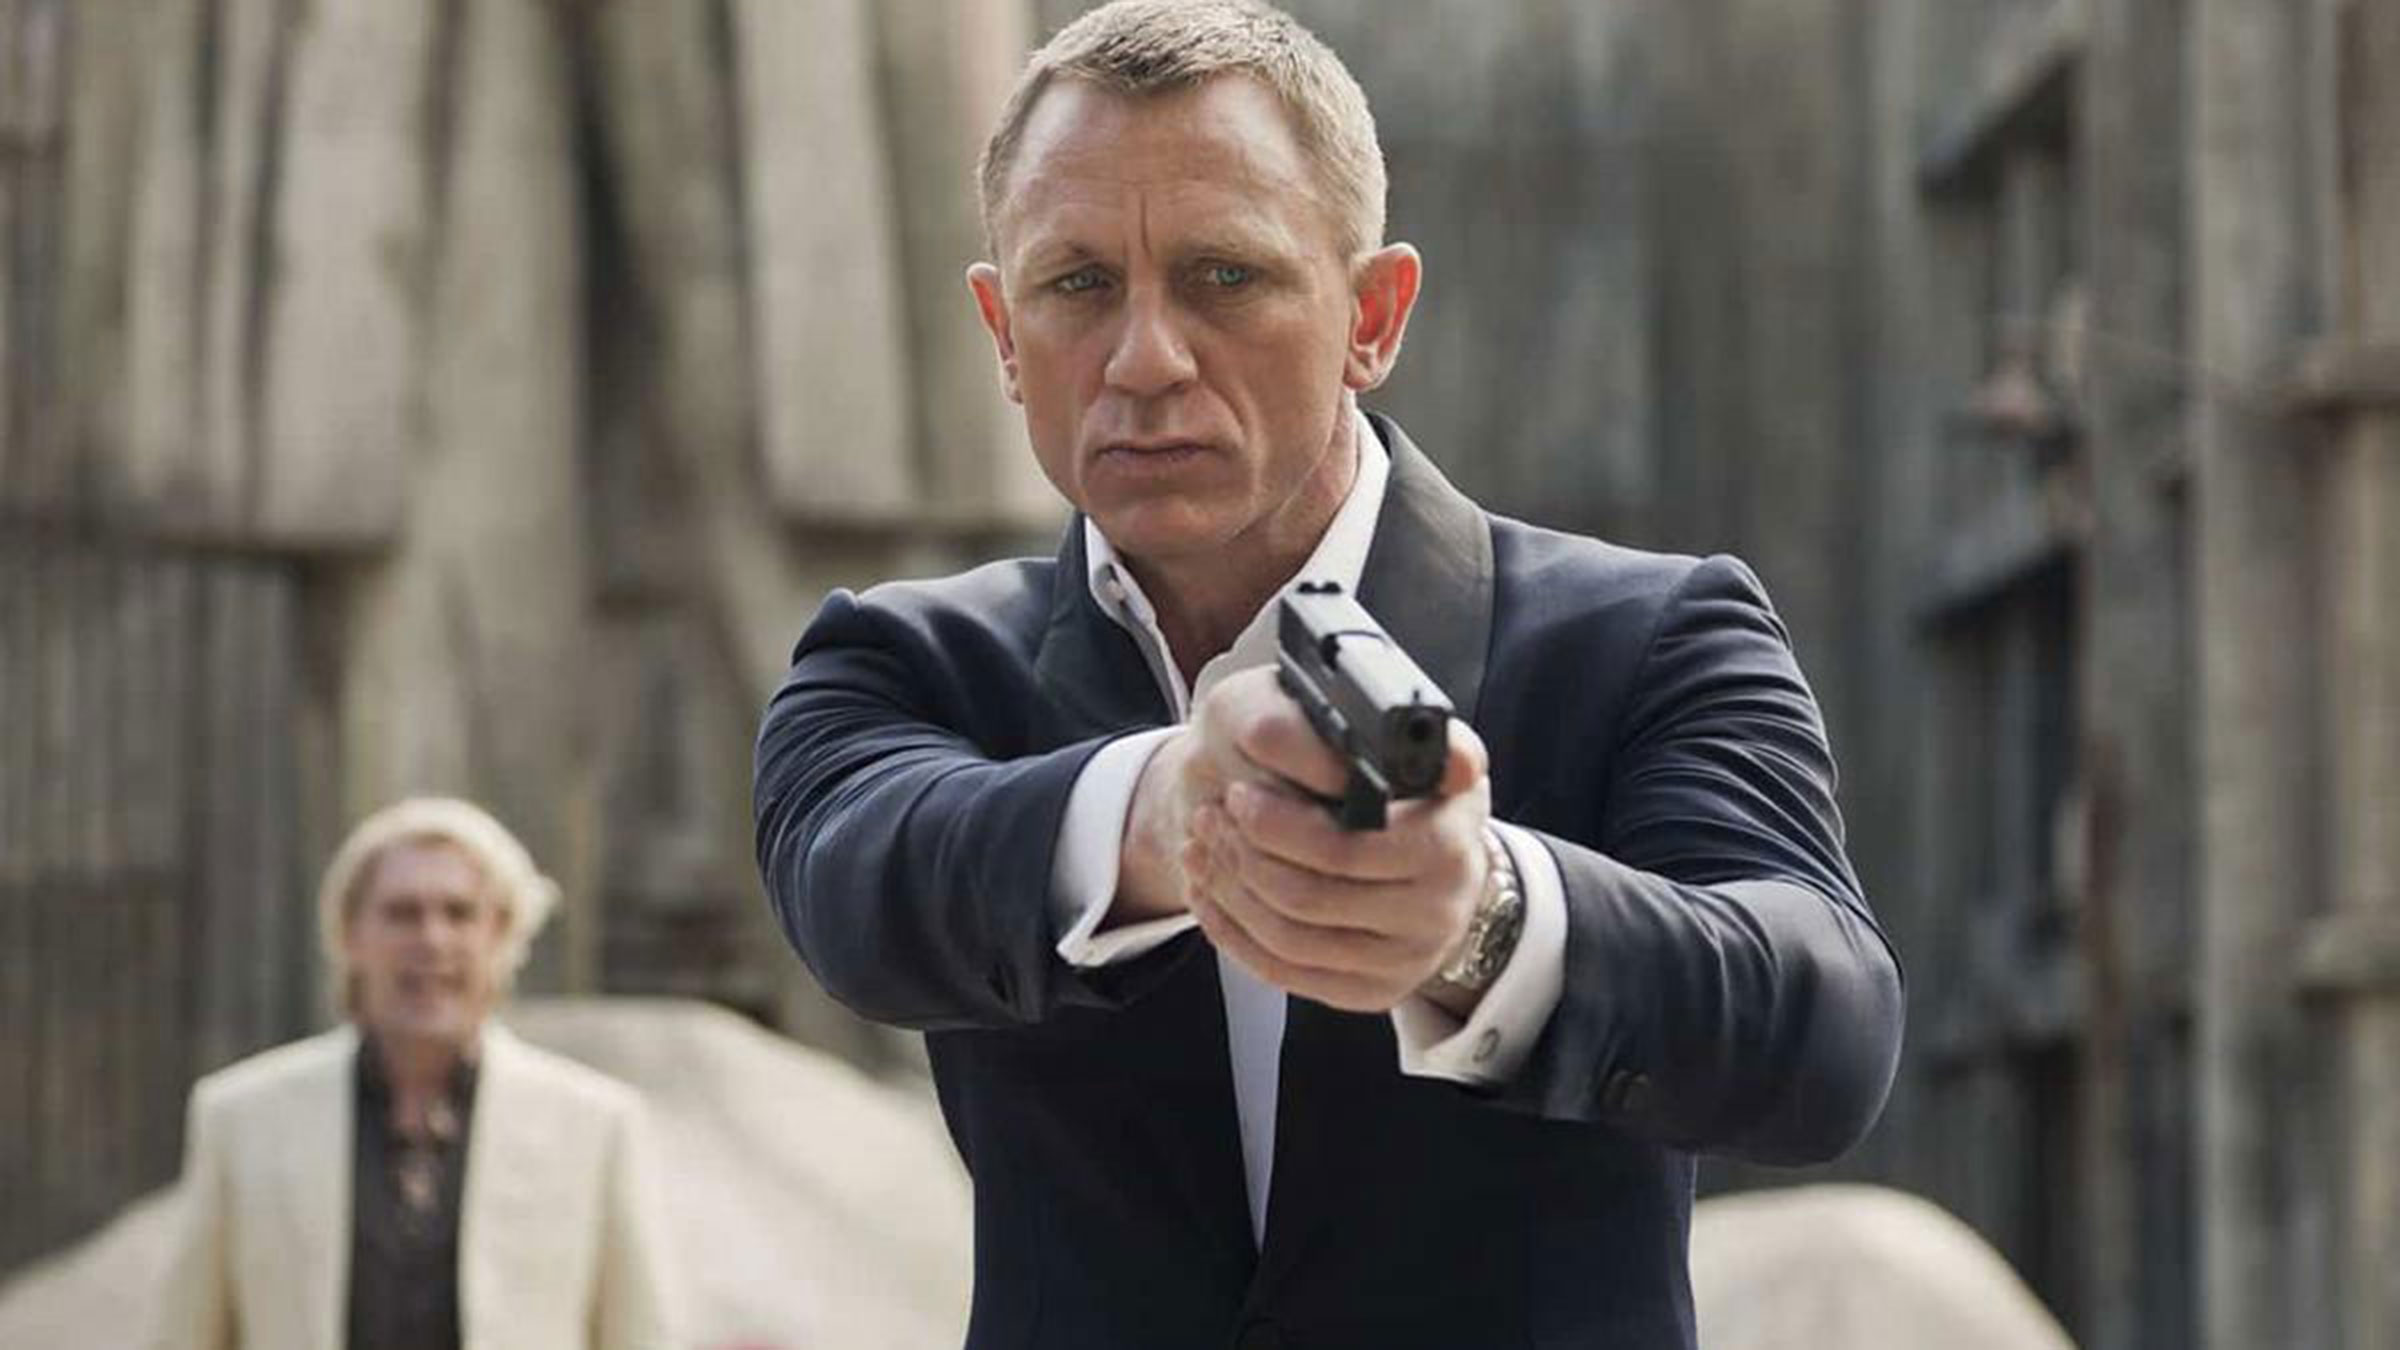 The curious reason why you will never see James Bond with an iPhone | Life